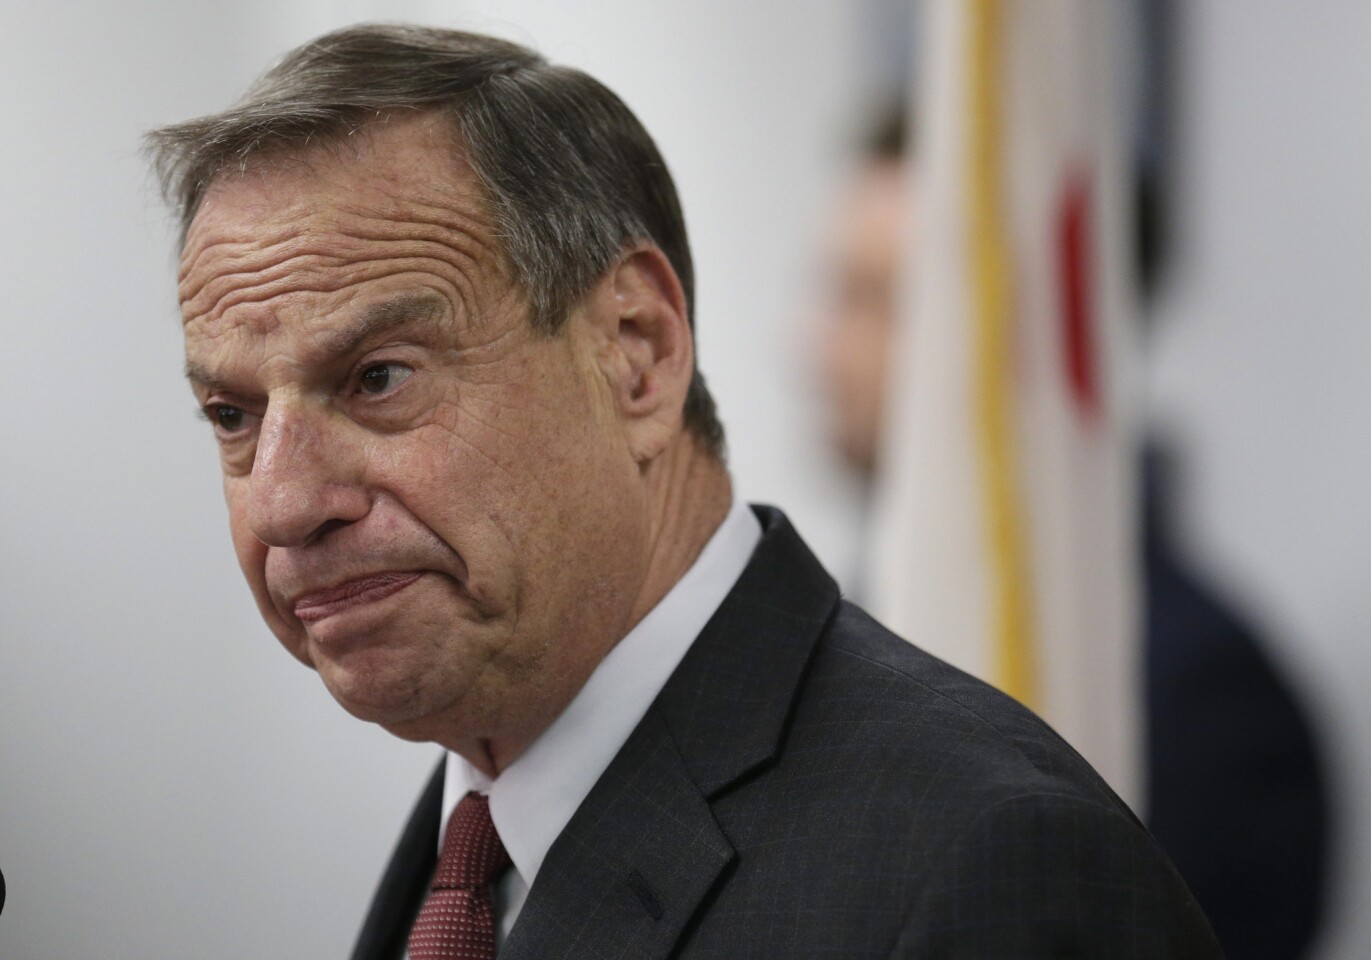 Rumors of sexual harassment turned into public accusations against San Diego Mayor Bob Filner in July. He took a leave of absence for "intensive therapy." Meanwhile, a recall petition drive began, Filner returned to take part in mediation, and he resigned from office effective Aug. 30. He pleaded guilty to three criminal counts stemming from his treatment of women while in office. On Monday, he was sentenced to 90 days of home confinement, was placed on probation for three years and was fined about $1,500. Above: Filner at a news conference at City Hall in San Diego in July. MORE YEAR IN REVIEW: Ted Rall's five best cartoons of 2013 6 developments that changed Latin America in 2013 10 tips for a better life from The Times' Op-Ed pages in 2013